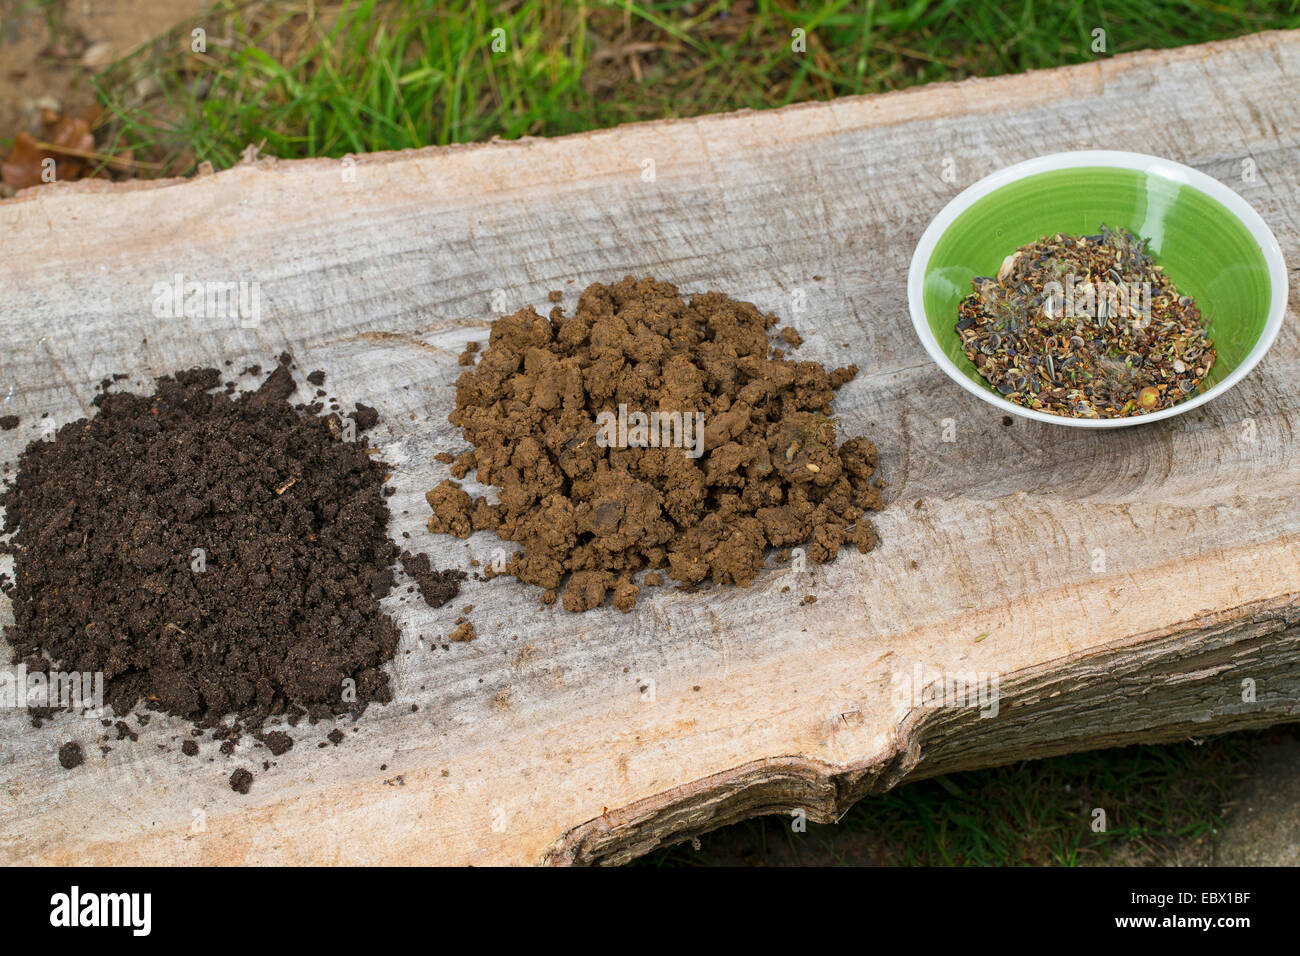 making a seed bomb with different seeds and fruits and soil, Germany Stock Photo